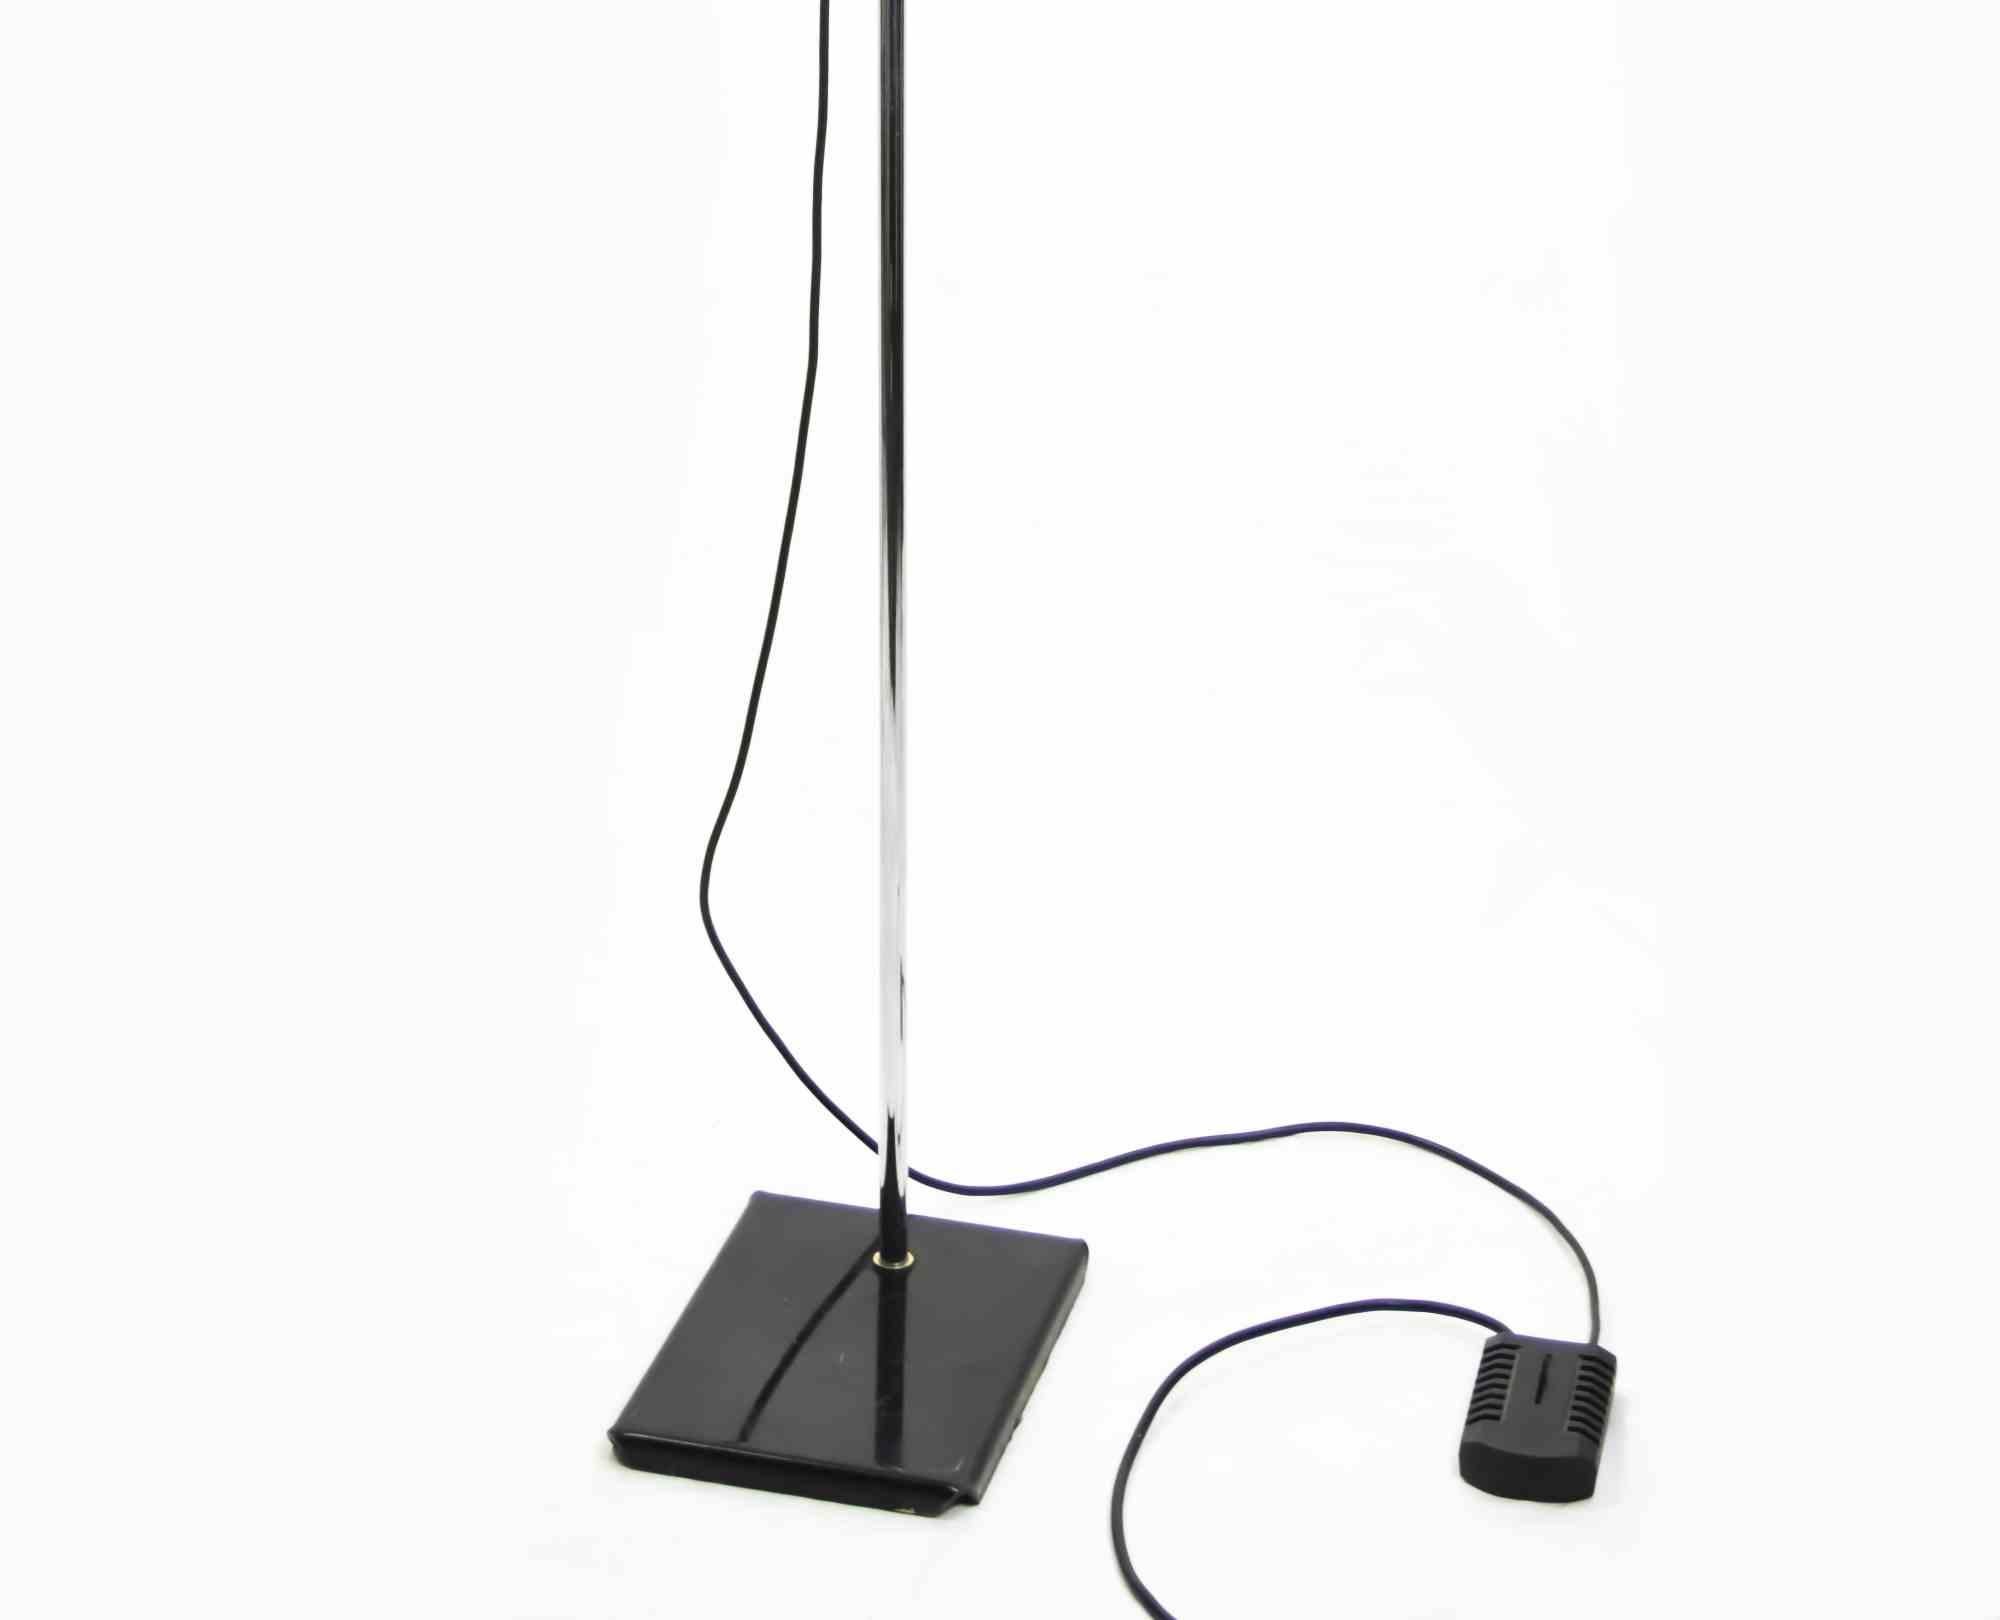 Chrome floor lamp is an original floor lamp design by Anonymous designer in the 1970s.

A chrome floor lamp with a minimal structure perfect to give elegamce to your room!

Mint conditions.